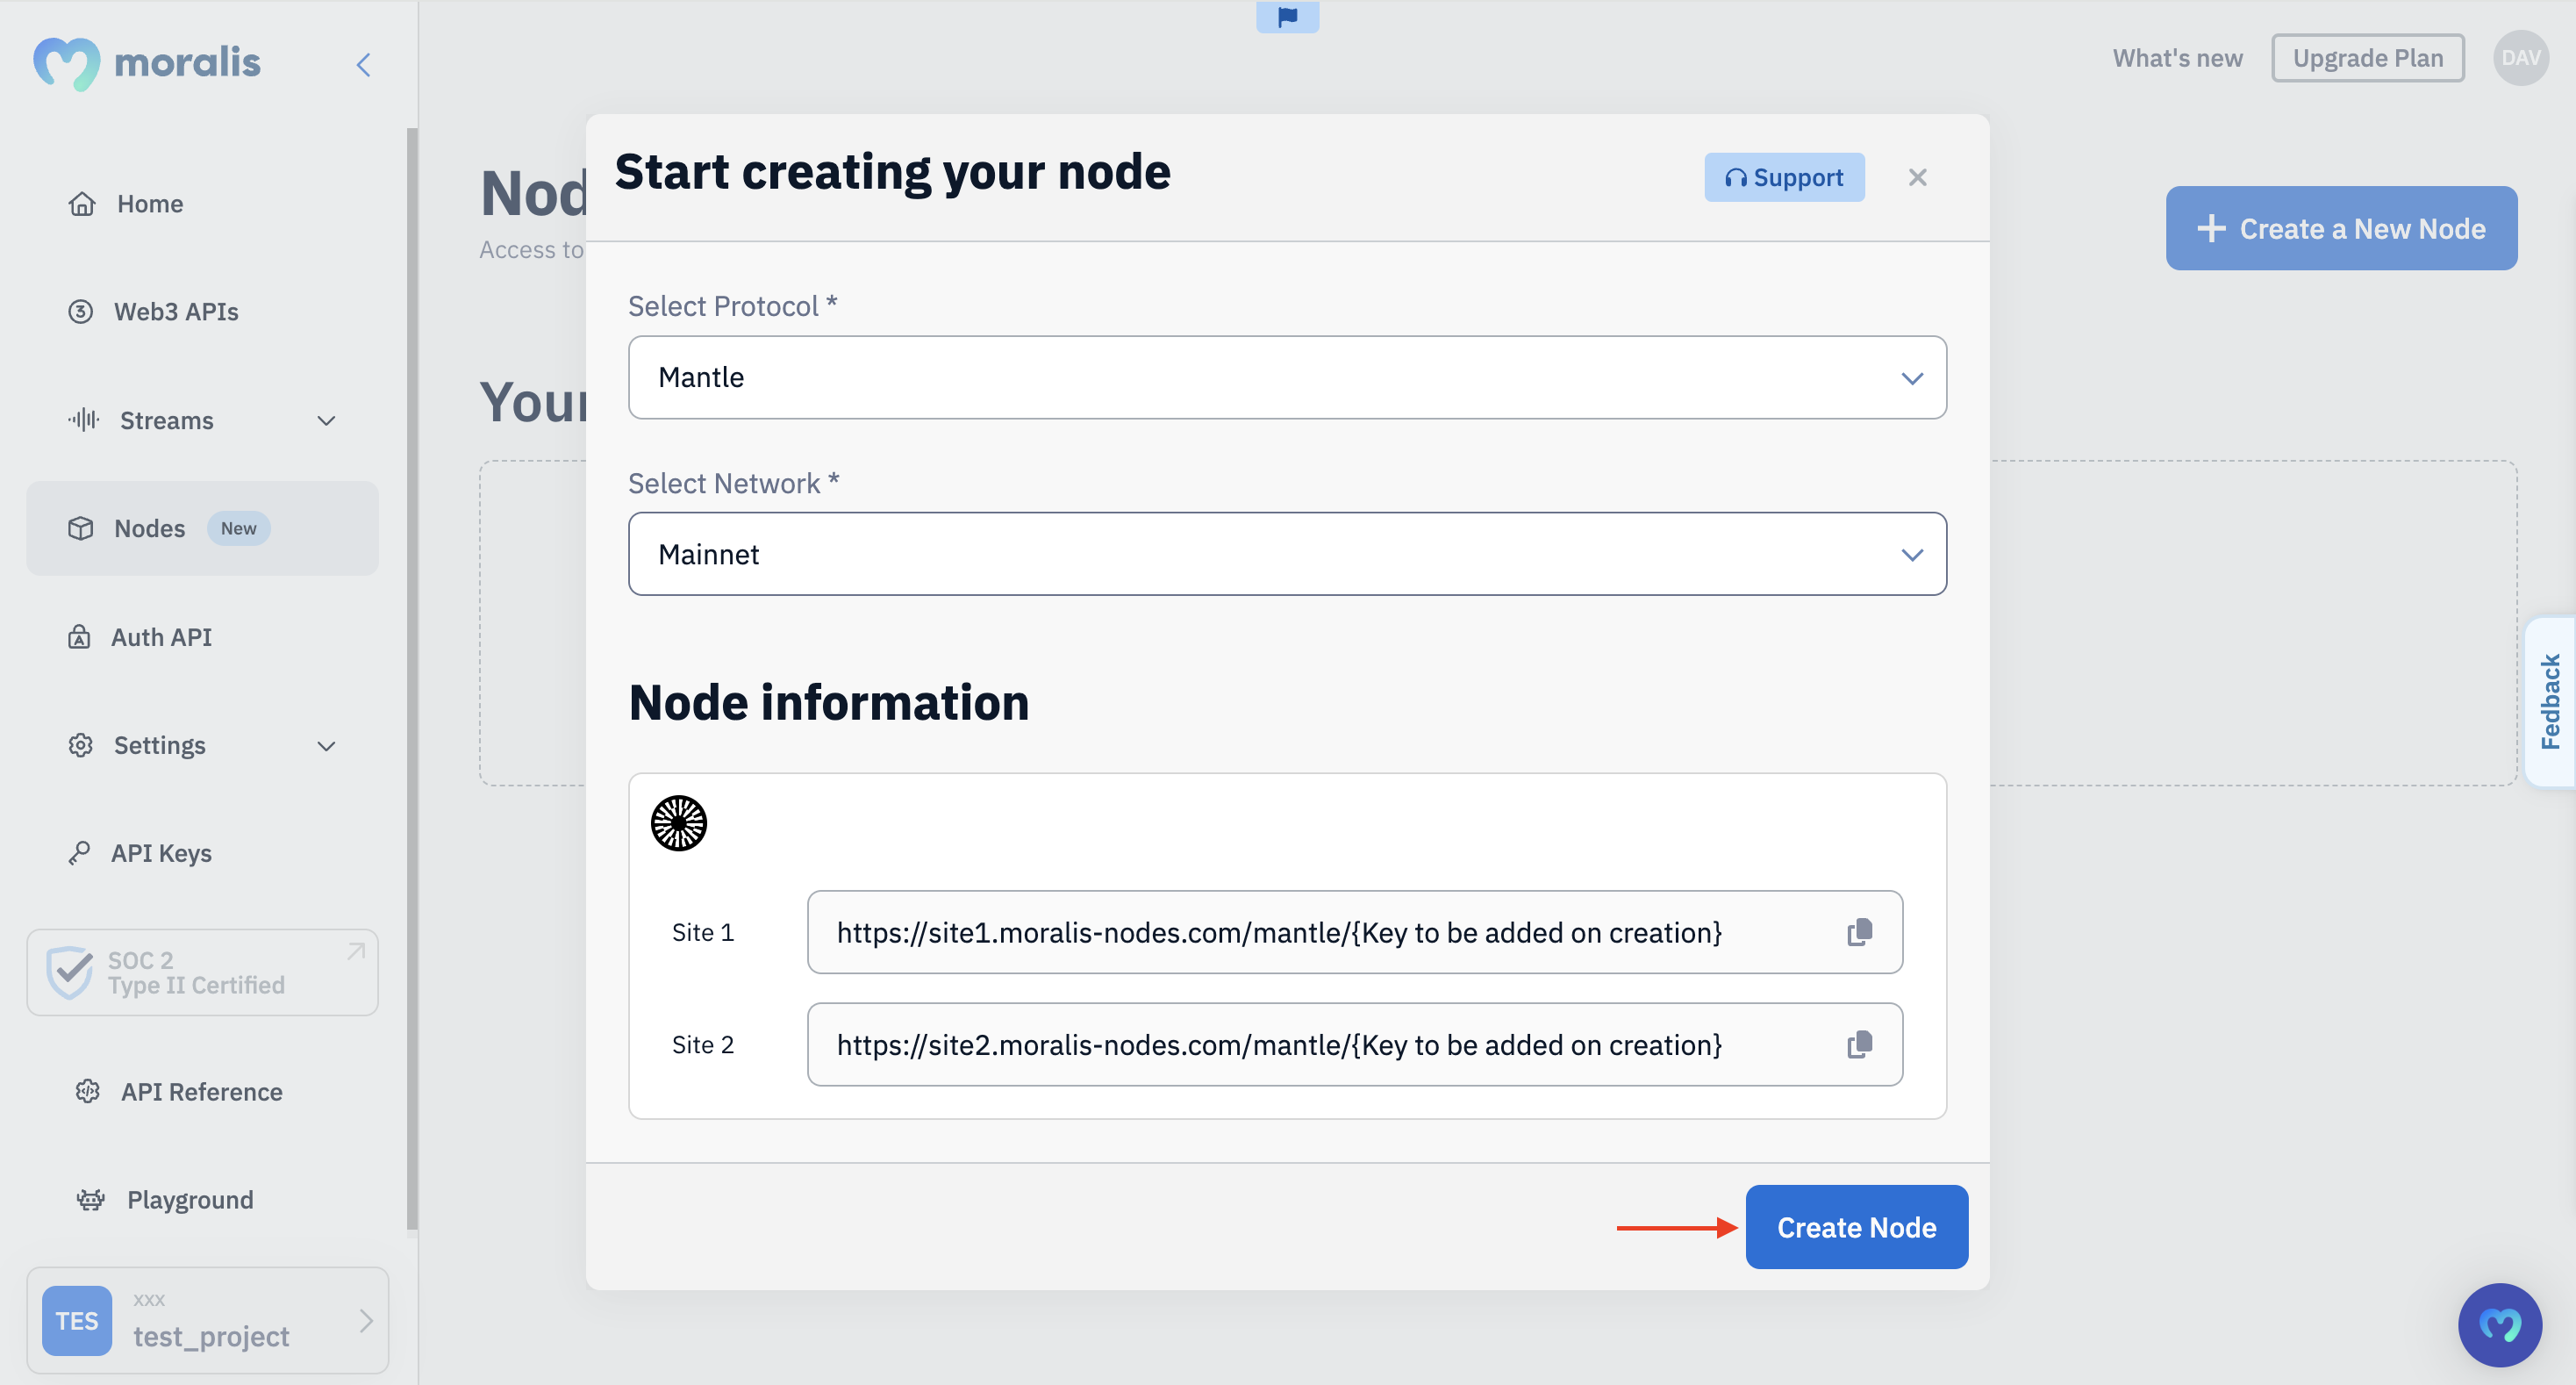 Red arrow pointing at "Create Node" button when configuring Mantle nodes.